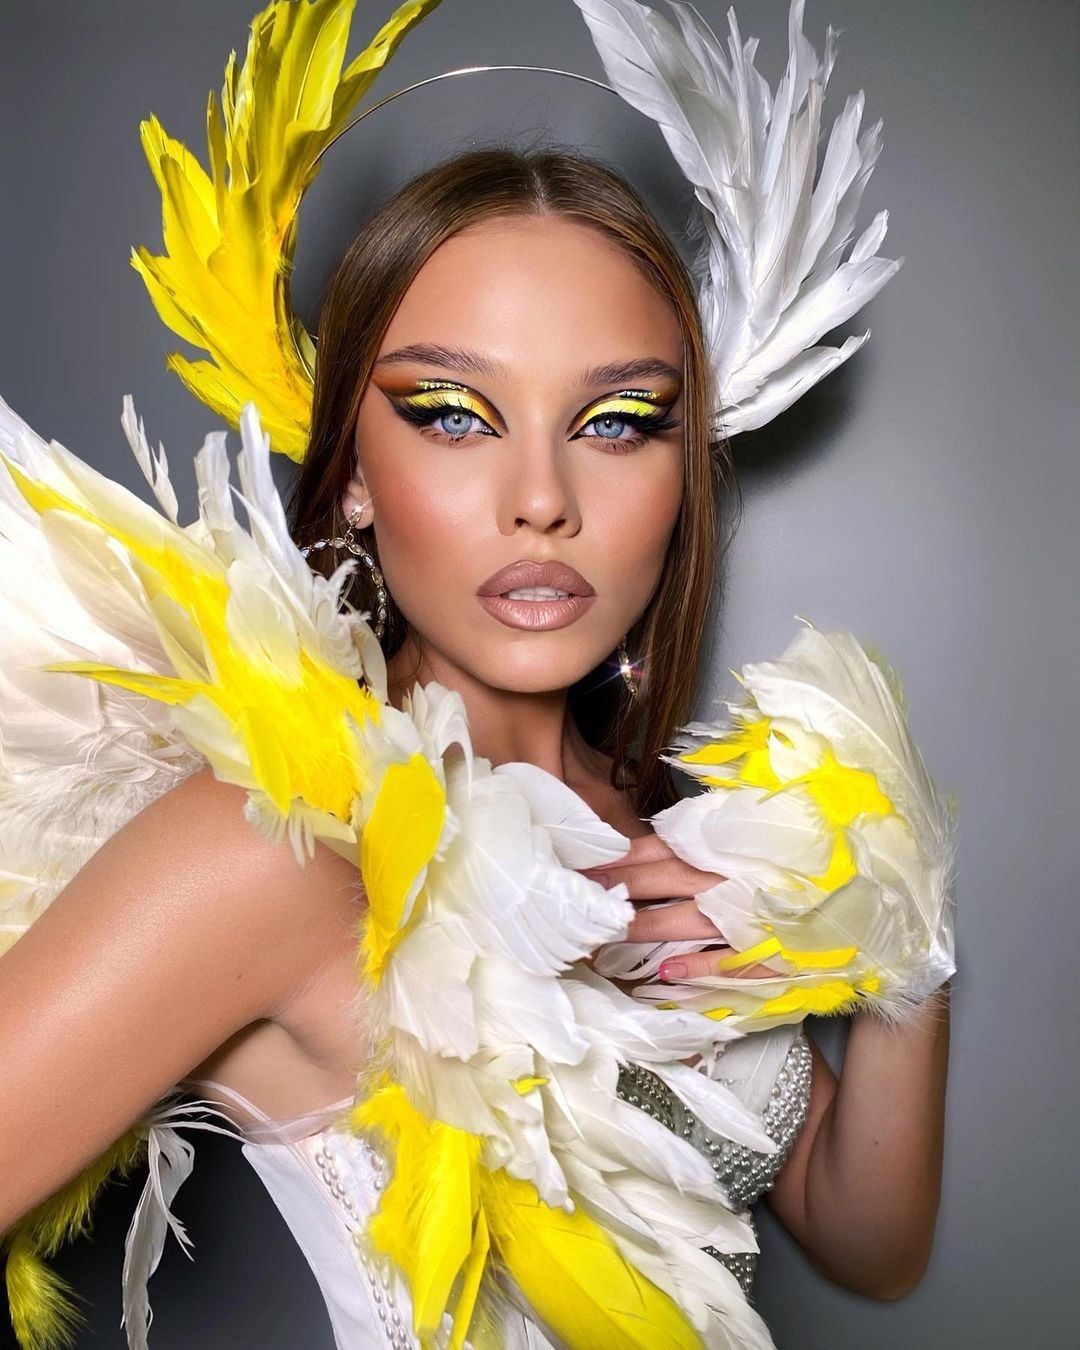 35 Valya_lelyukh makeup ideas that will make you look expensive.